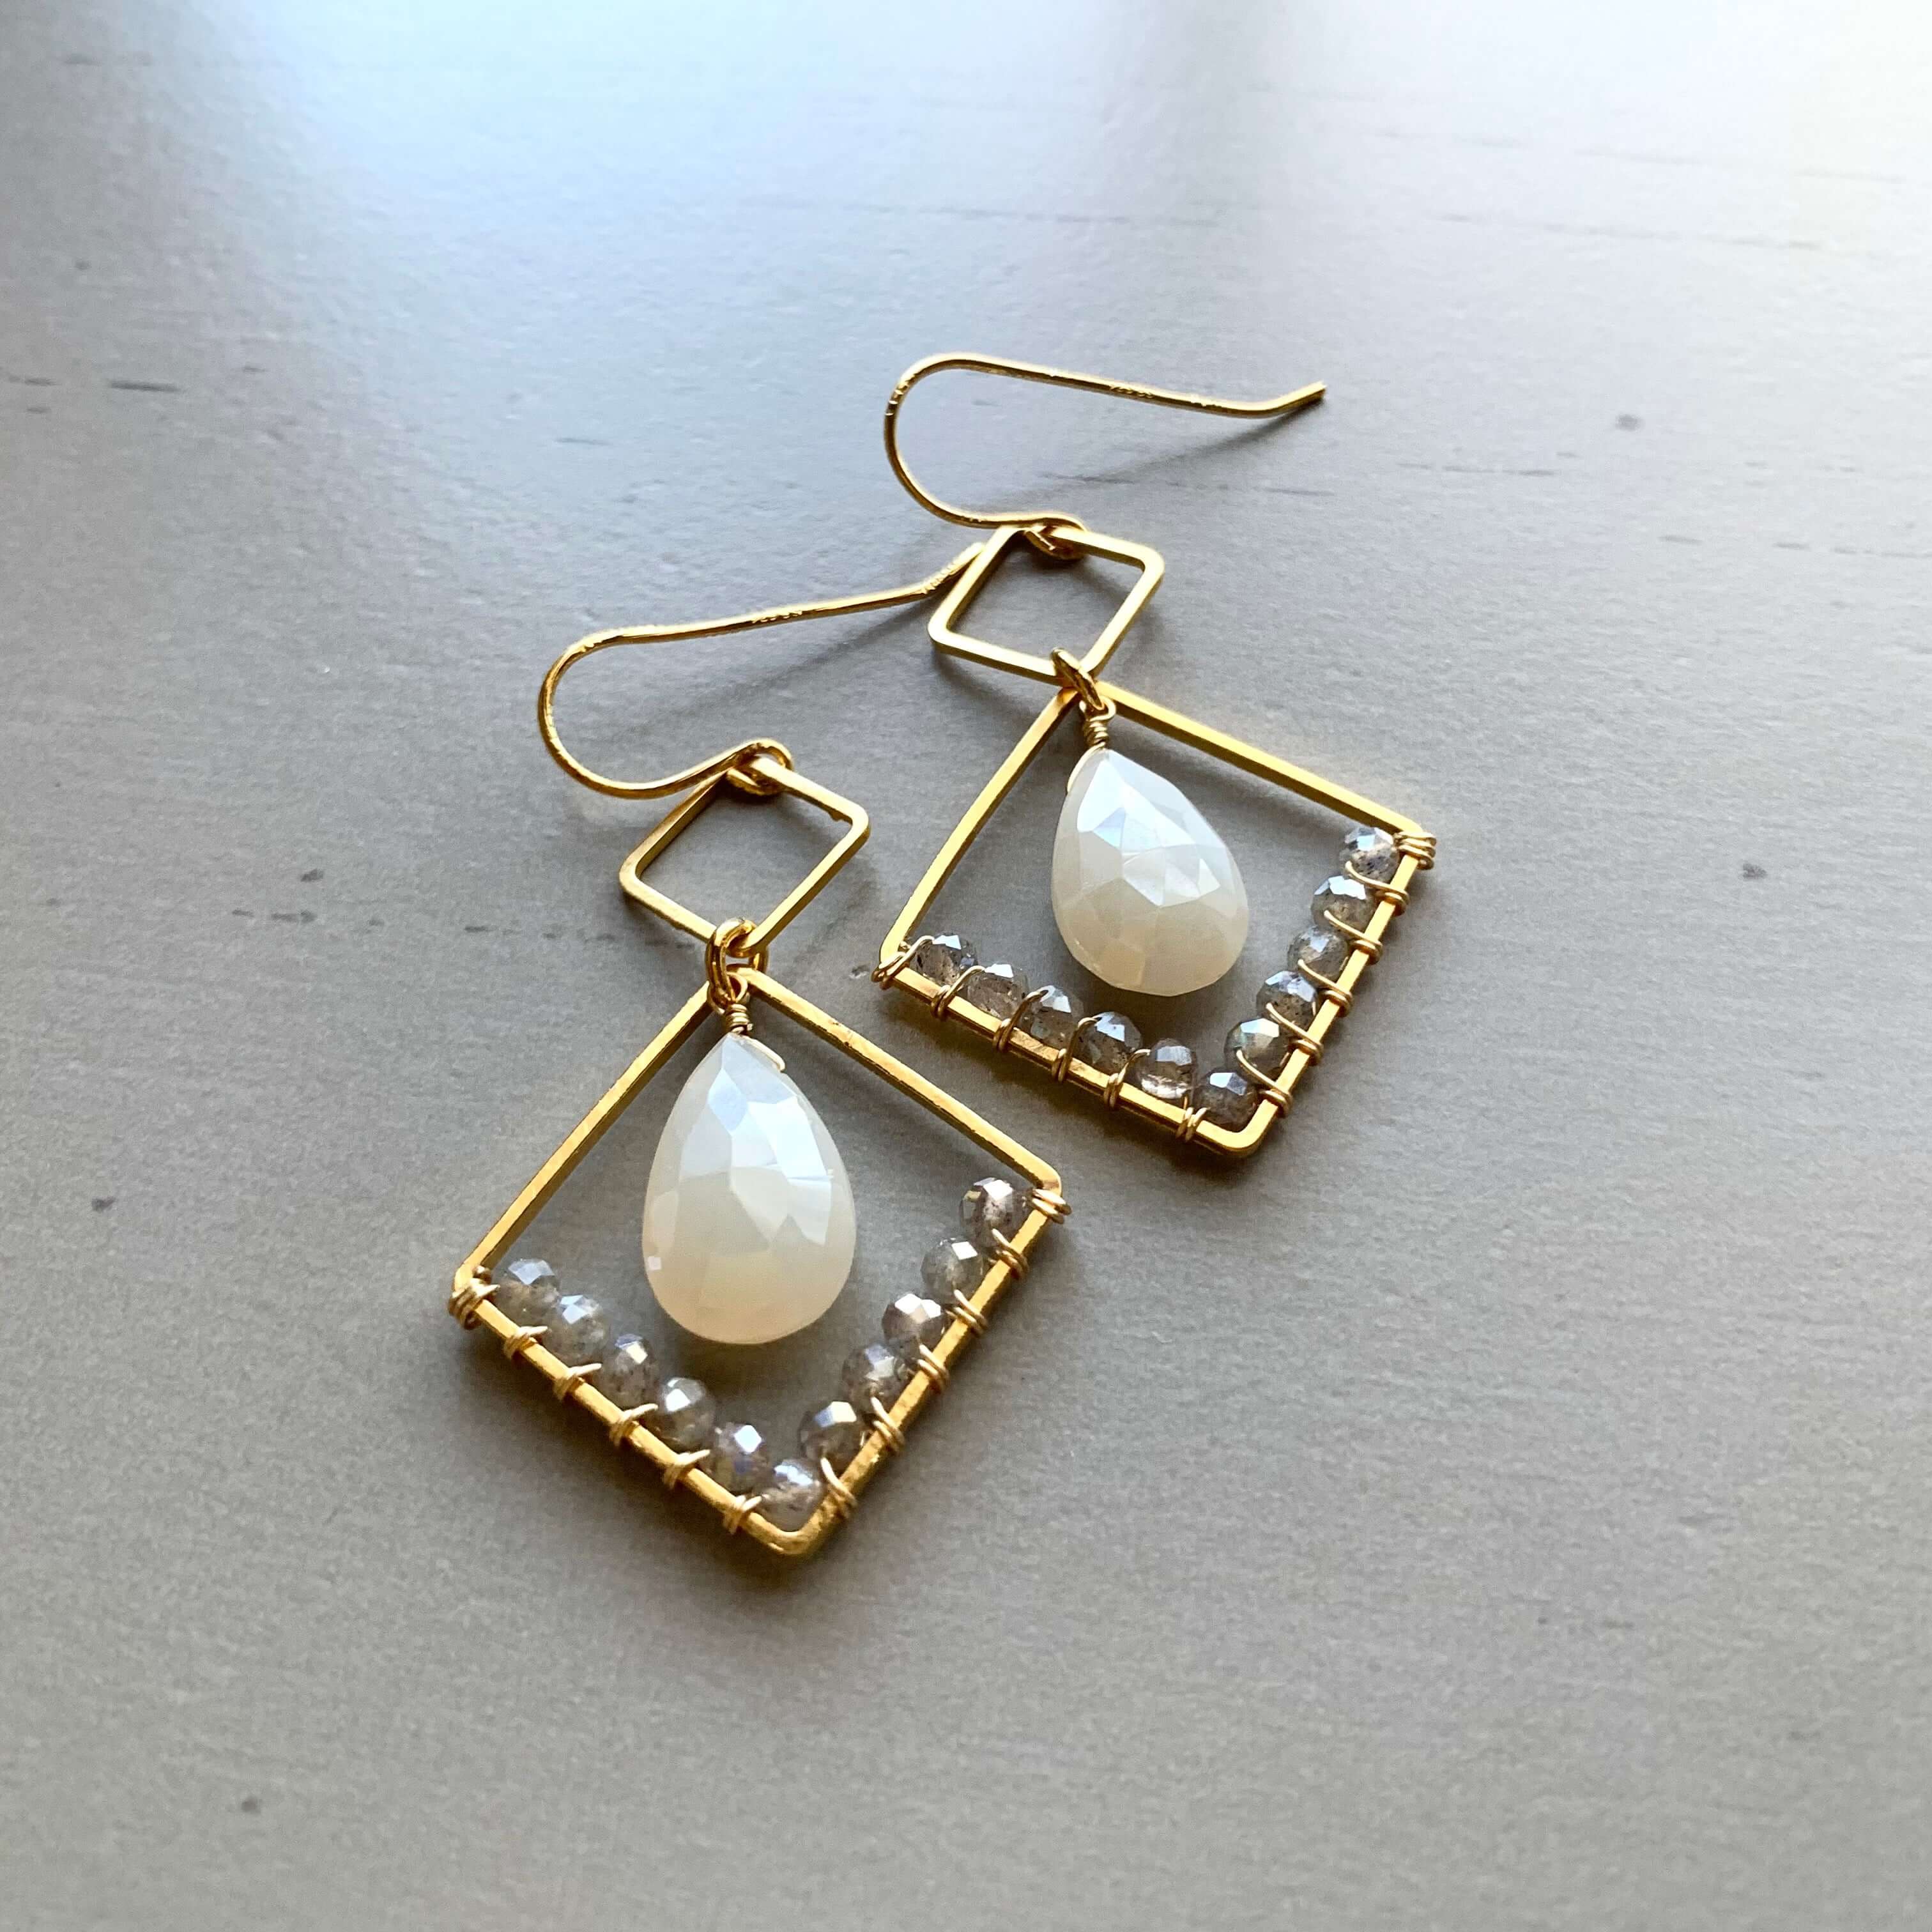 Gold White Chalcedony with labradorite stones Geometric Earrings 